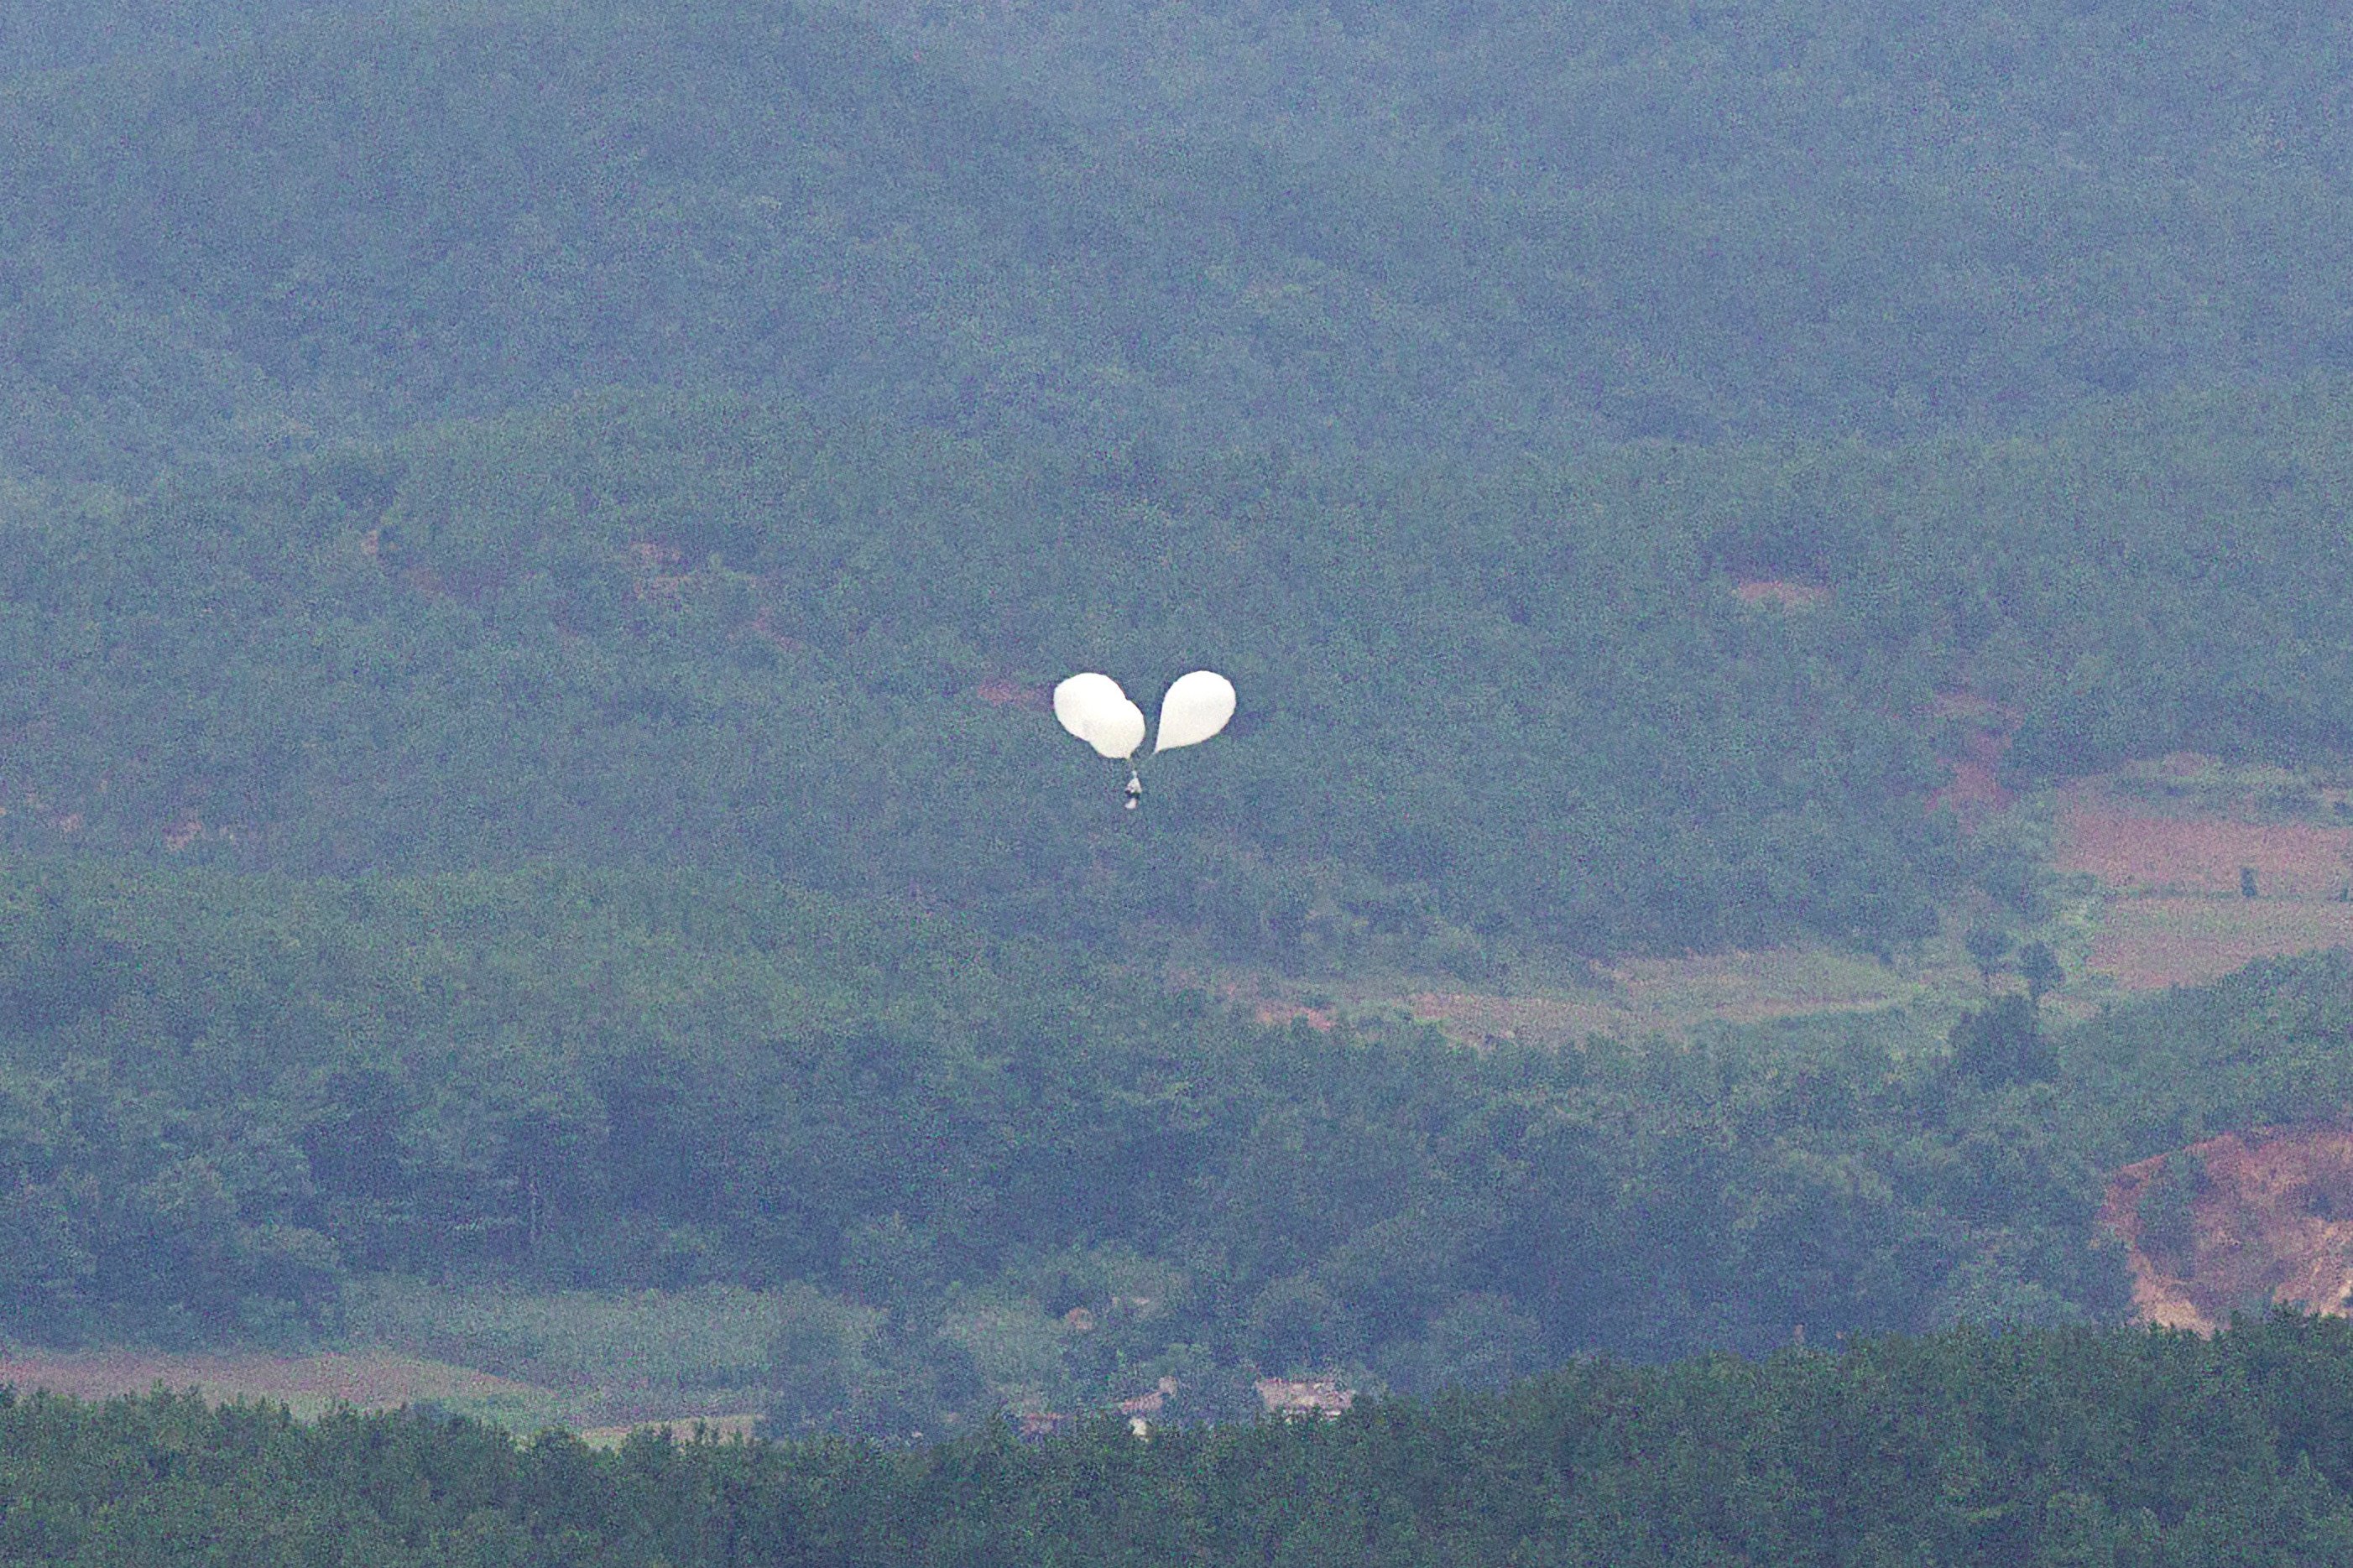 A balloon carrying garbage being flown from the North Korean border town of Kaepung toward the South. Photo: dpa